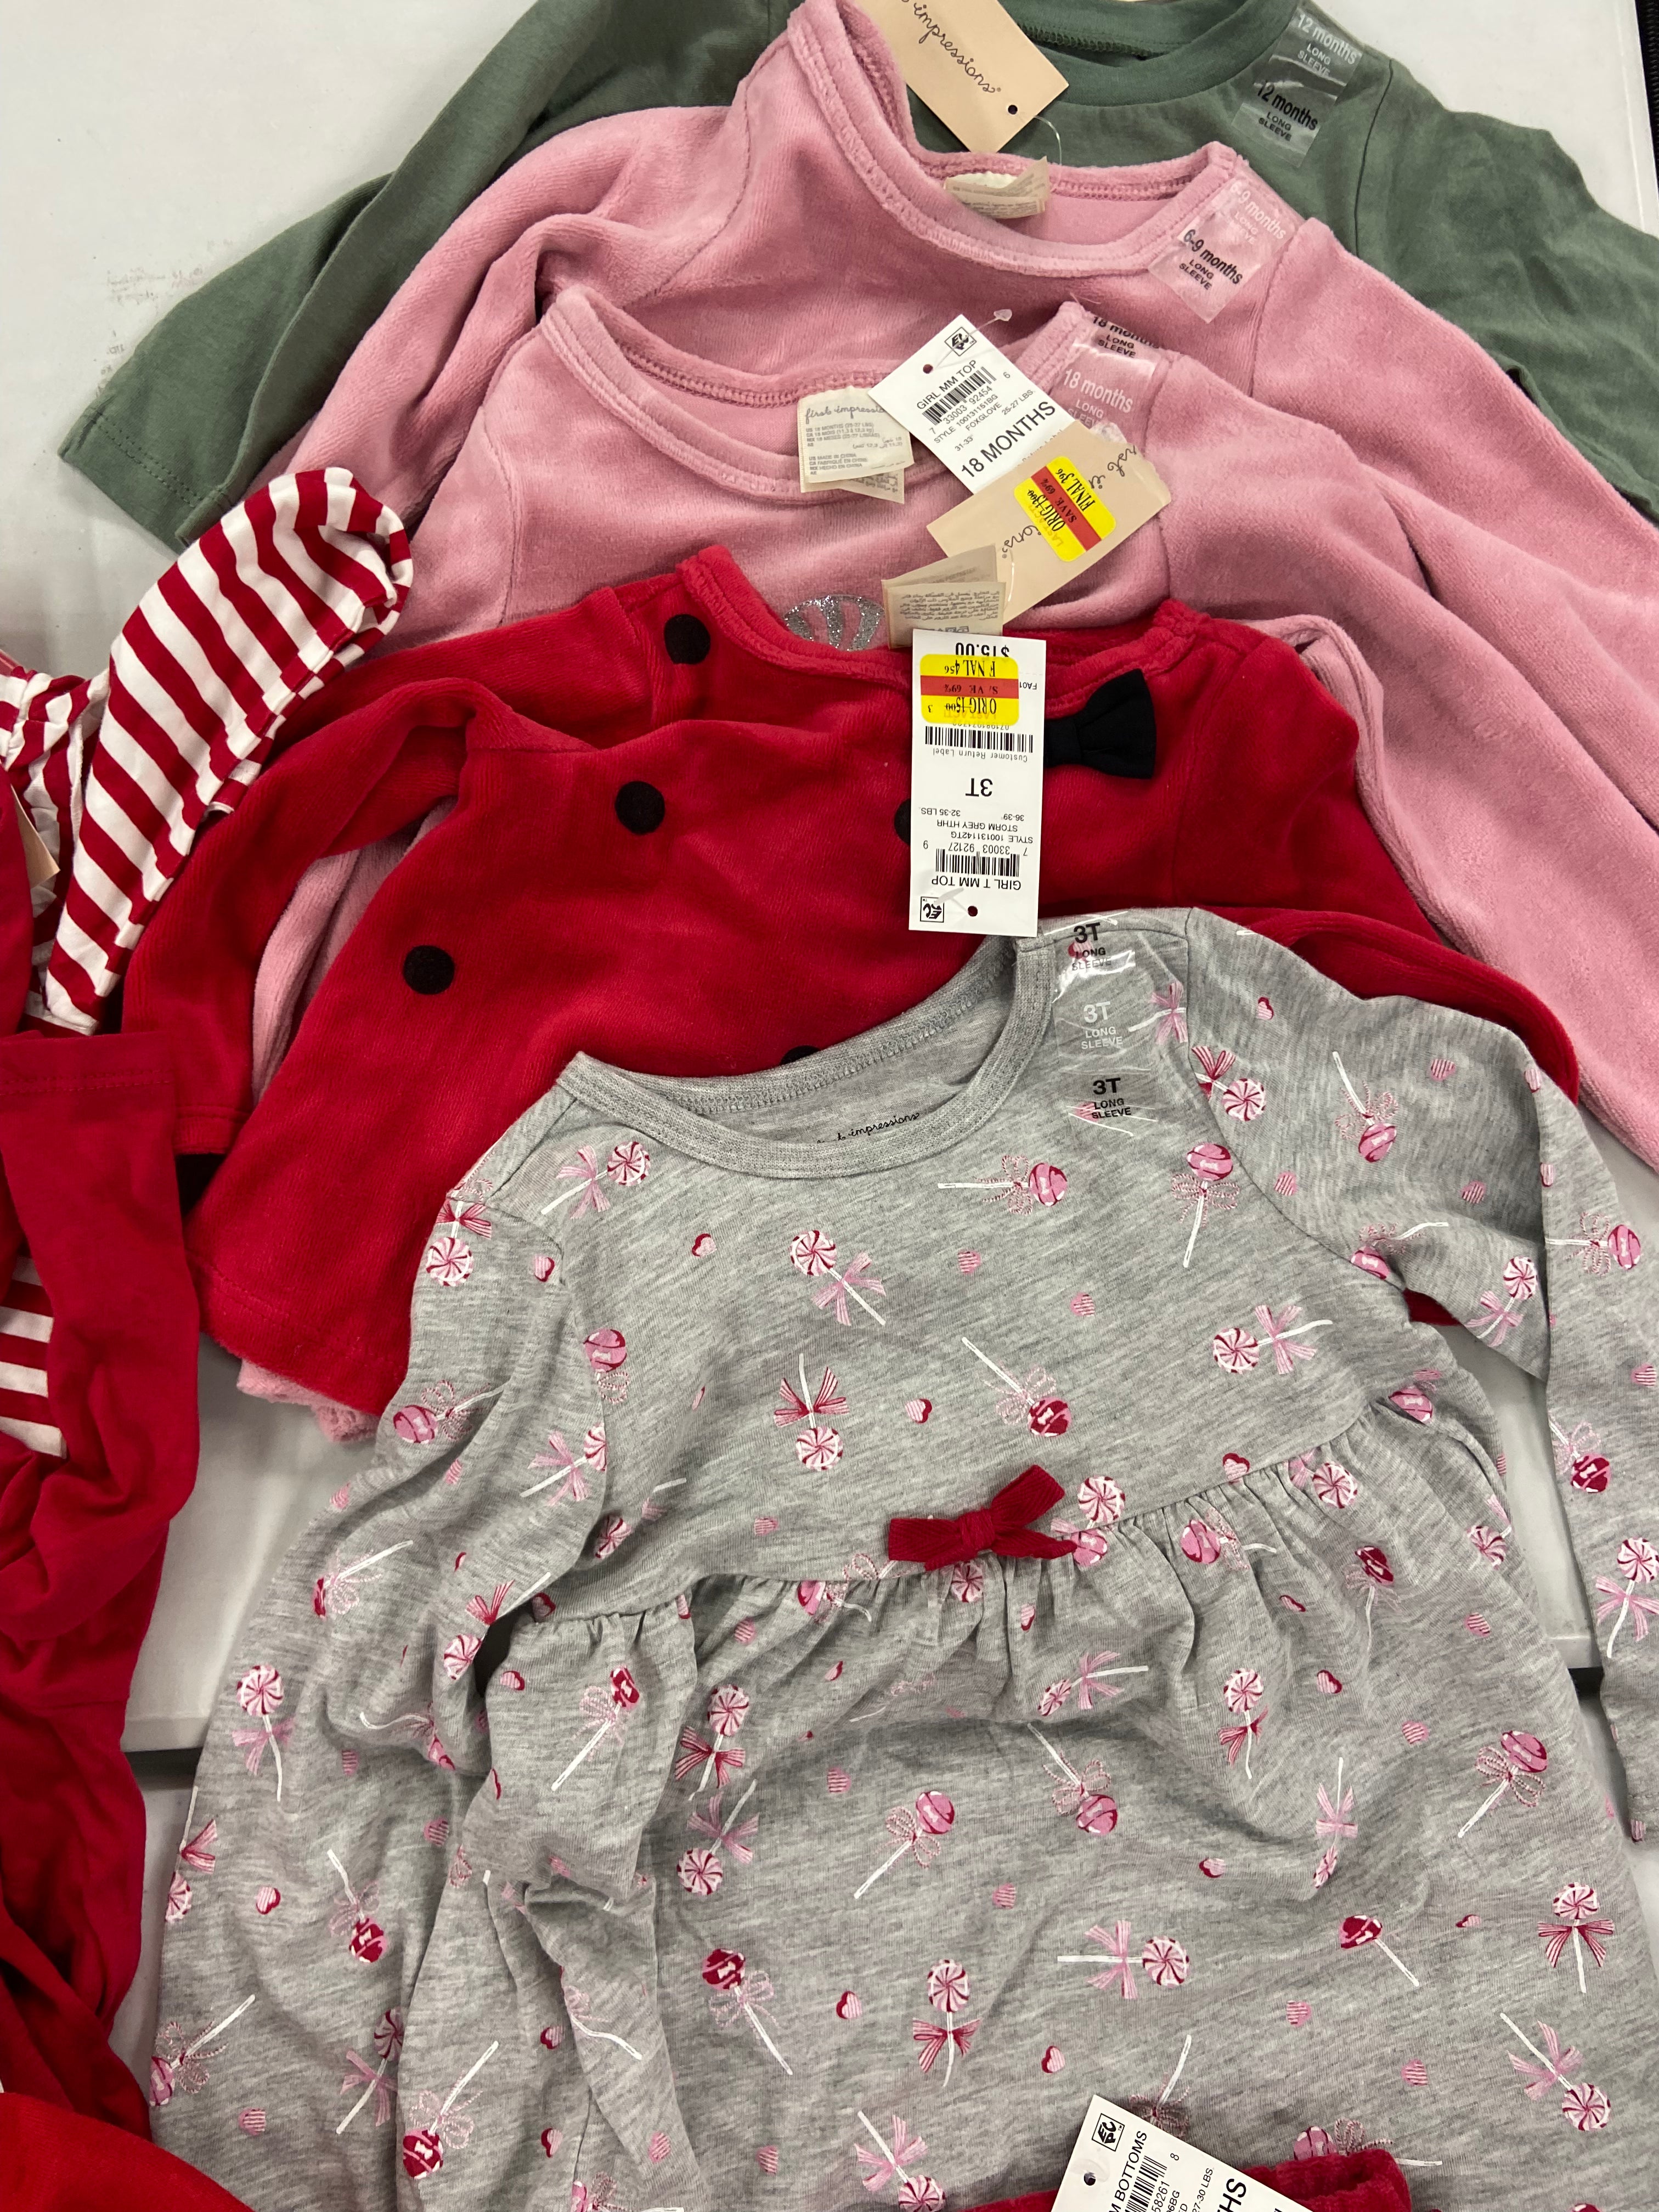 Baby's Clothing Assorted Wholesale Lot, HILFIGER, CARTER'S, -